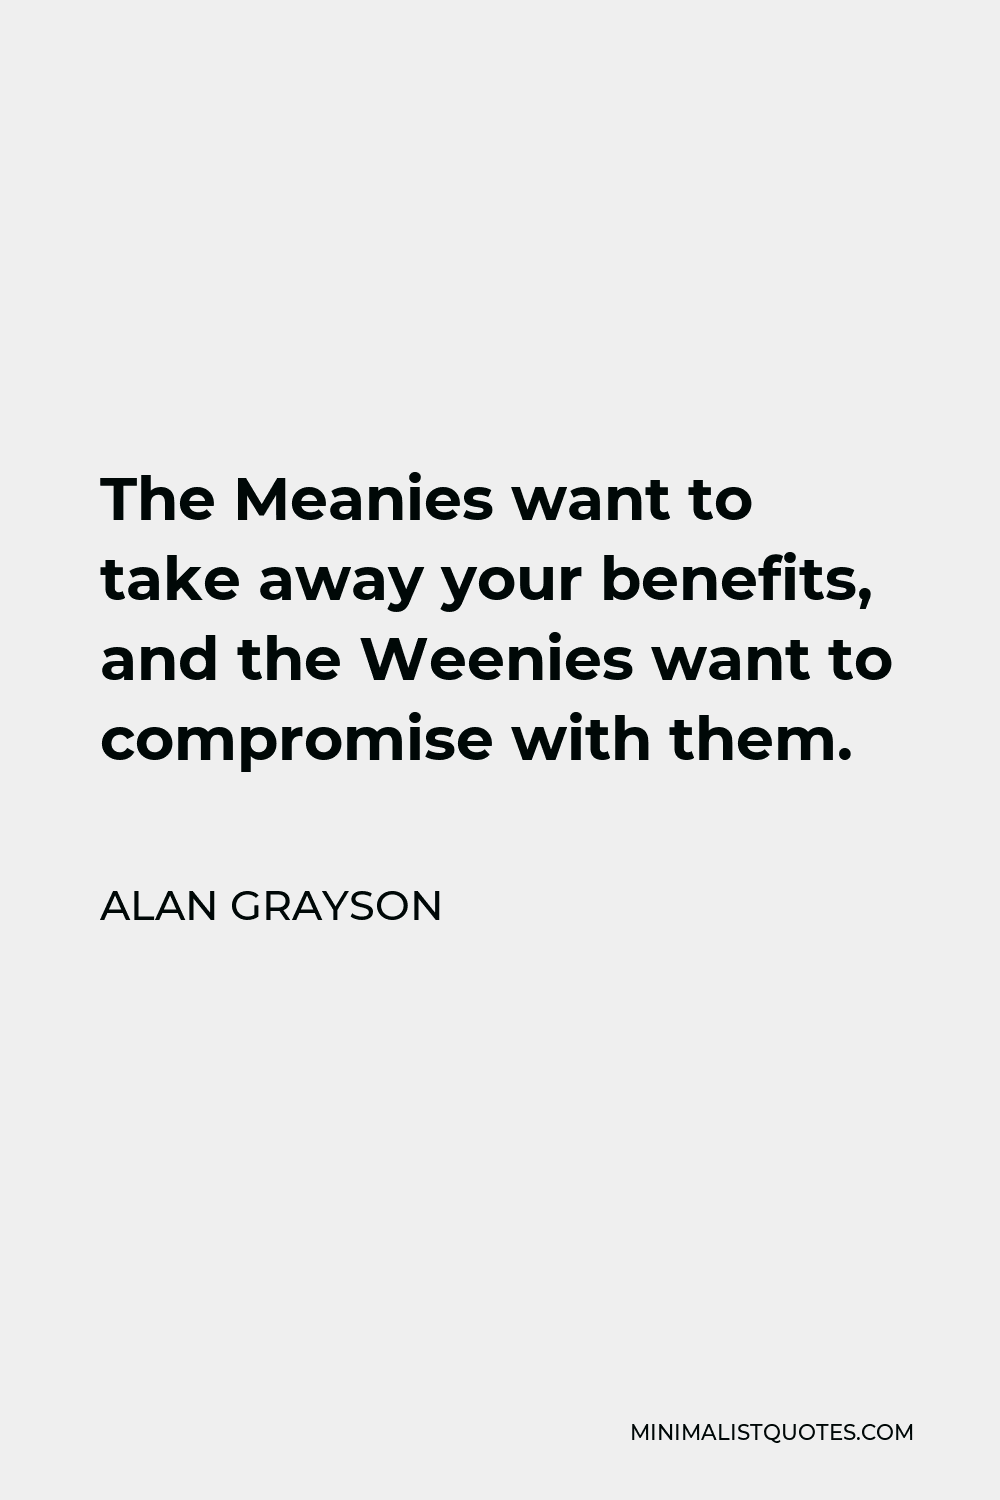 Alan Grayson Quote - The Meanies want to take away your benefits, and the Weenies want to compromise with them.